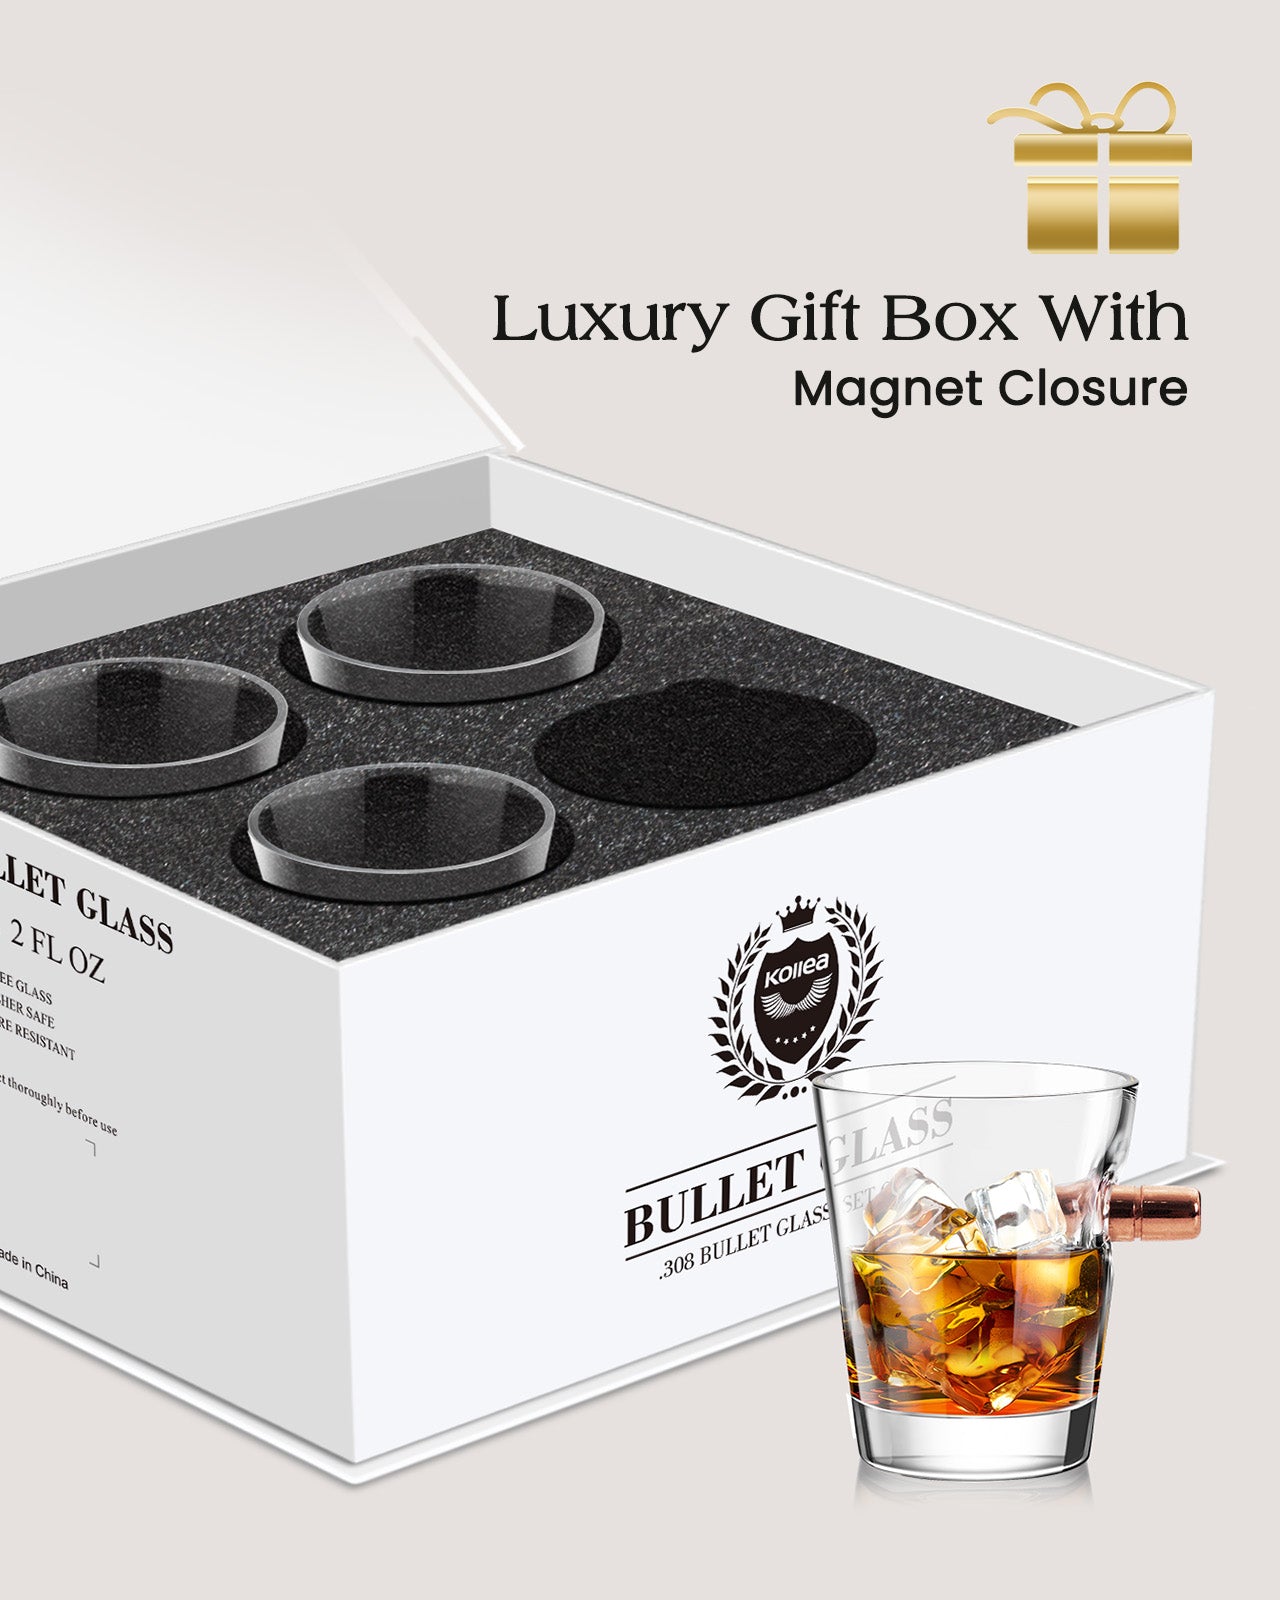 Whiskey Glasses and Whiskey Bullets - Premium Whiskey Glass Set, 2 Glasses for Scotch or Bourbon in Gift Box | Stainless Steel Whisky Stones Shaped